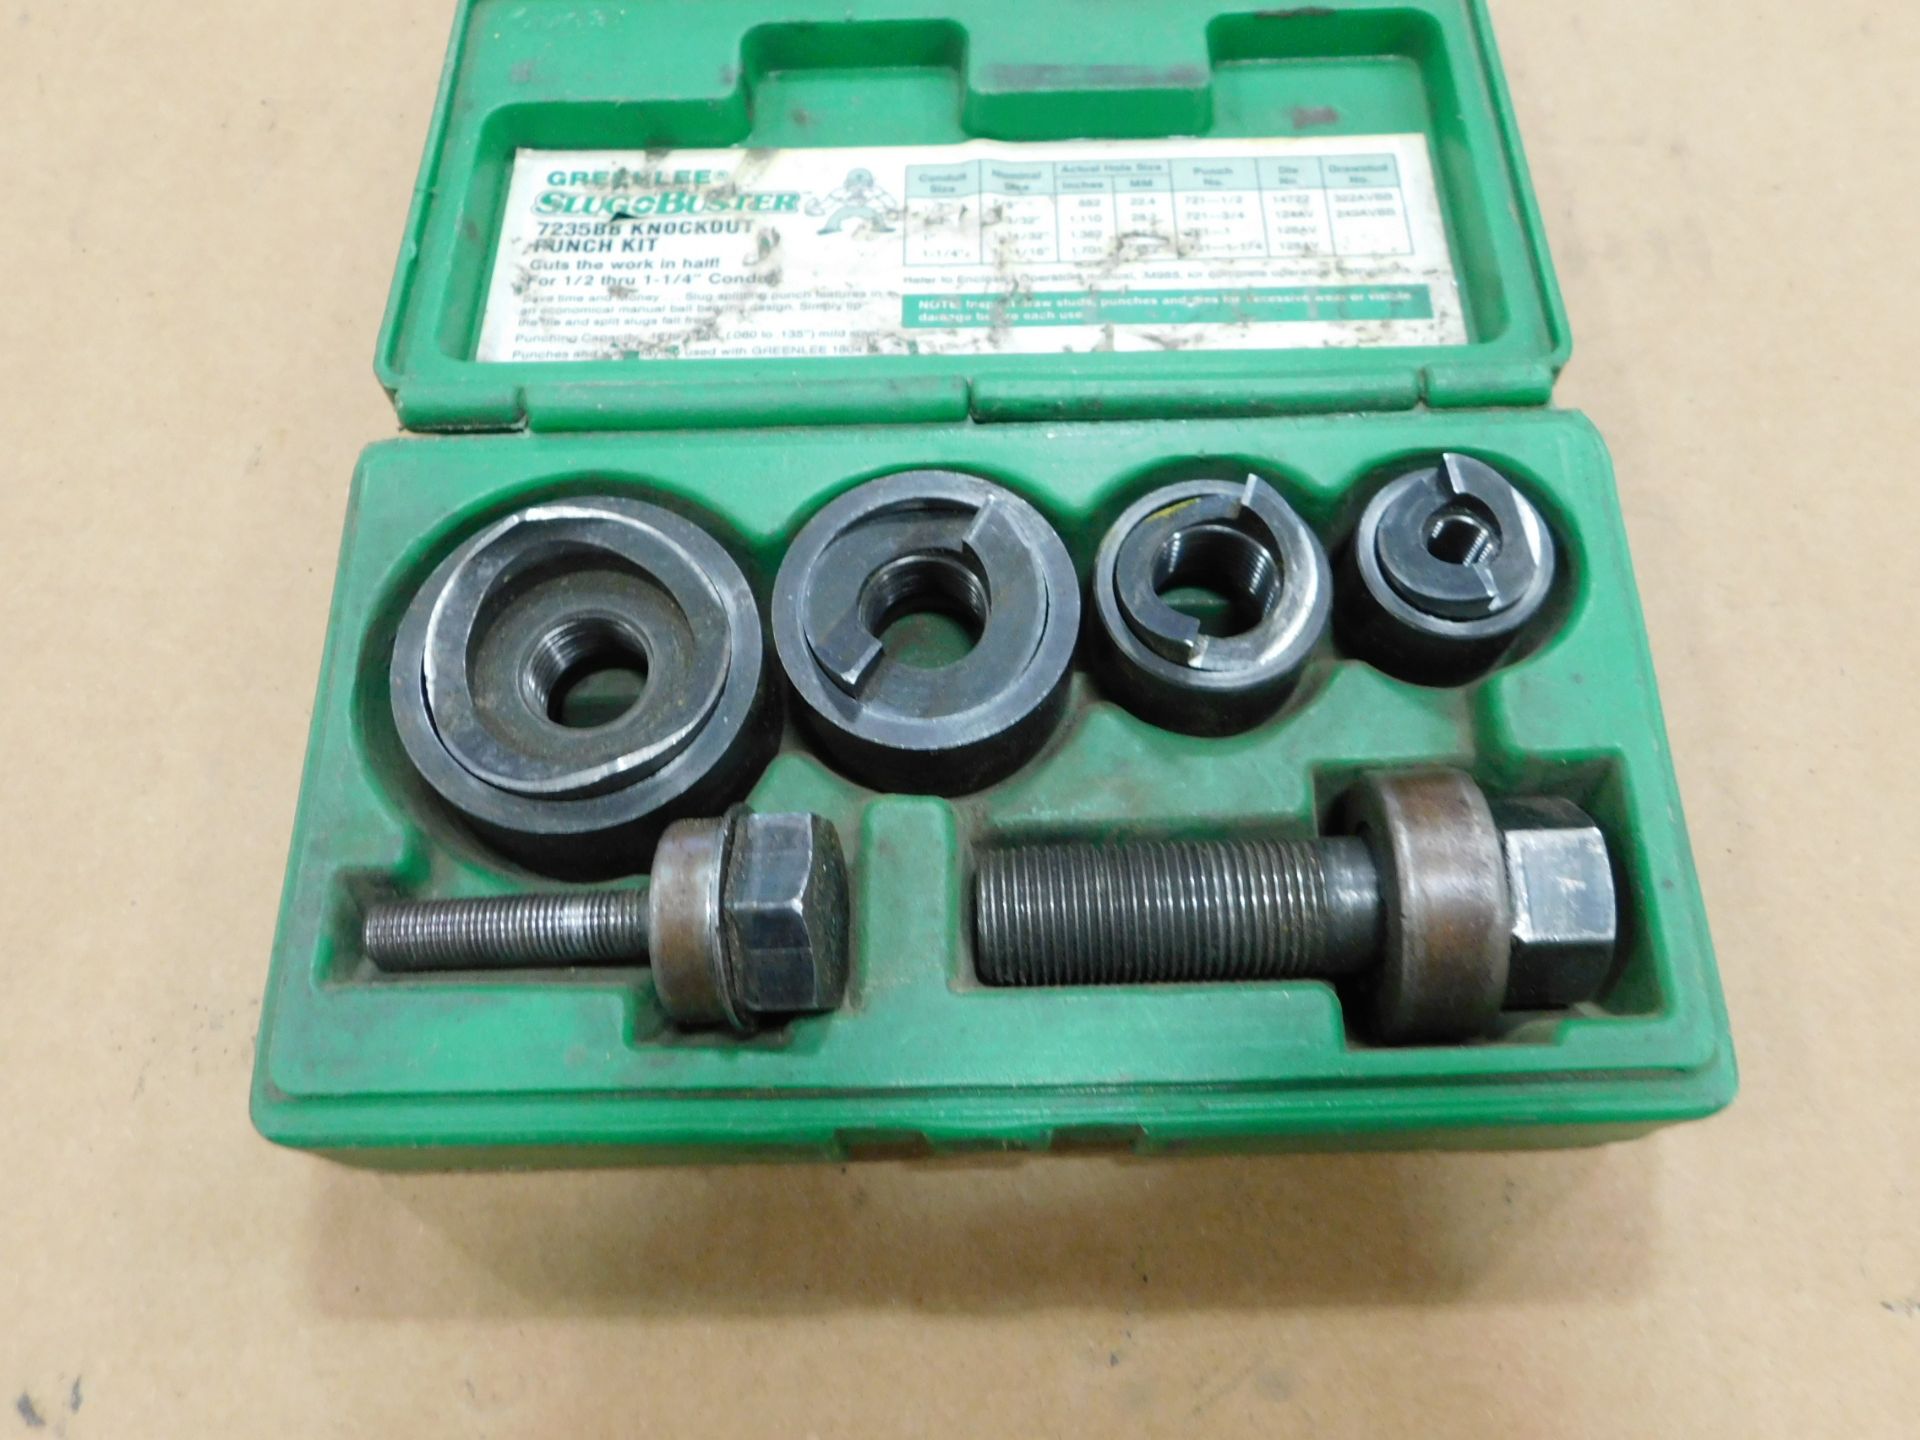 Greenlee 7235BB Knockout Punch Set